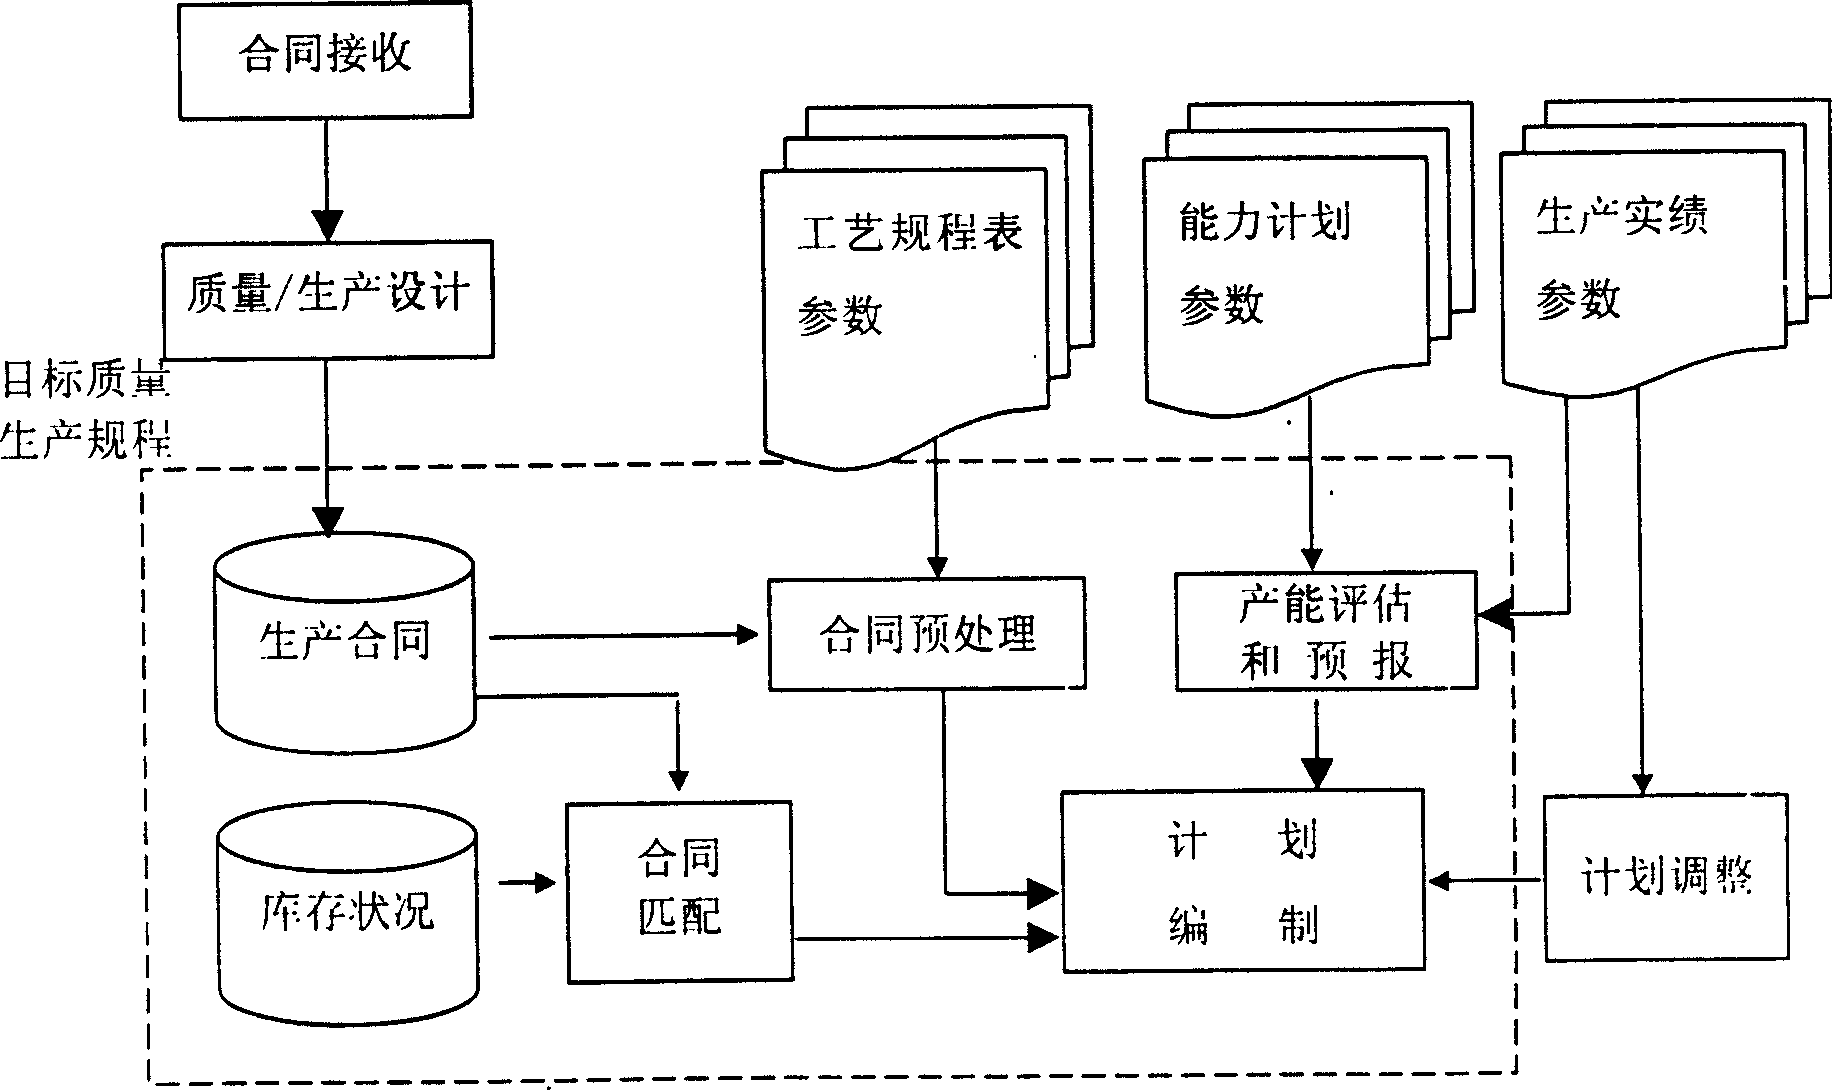 Method of united optimized managing contracts and repertories in plane of steel production